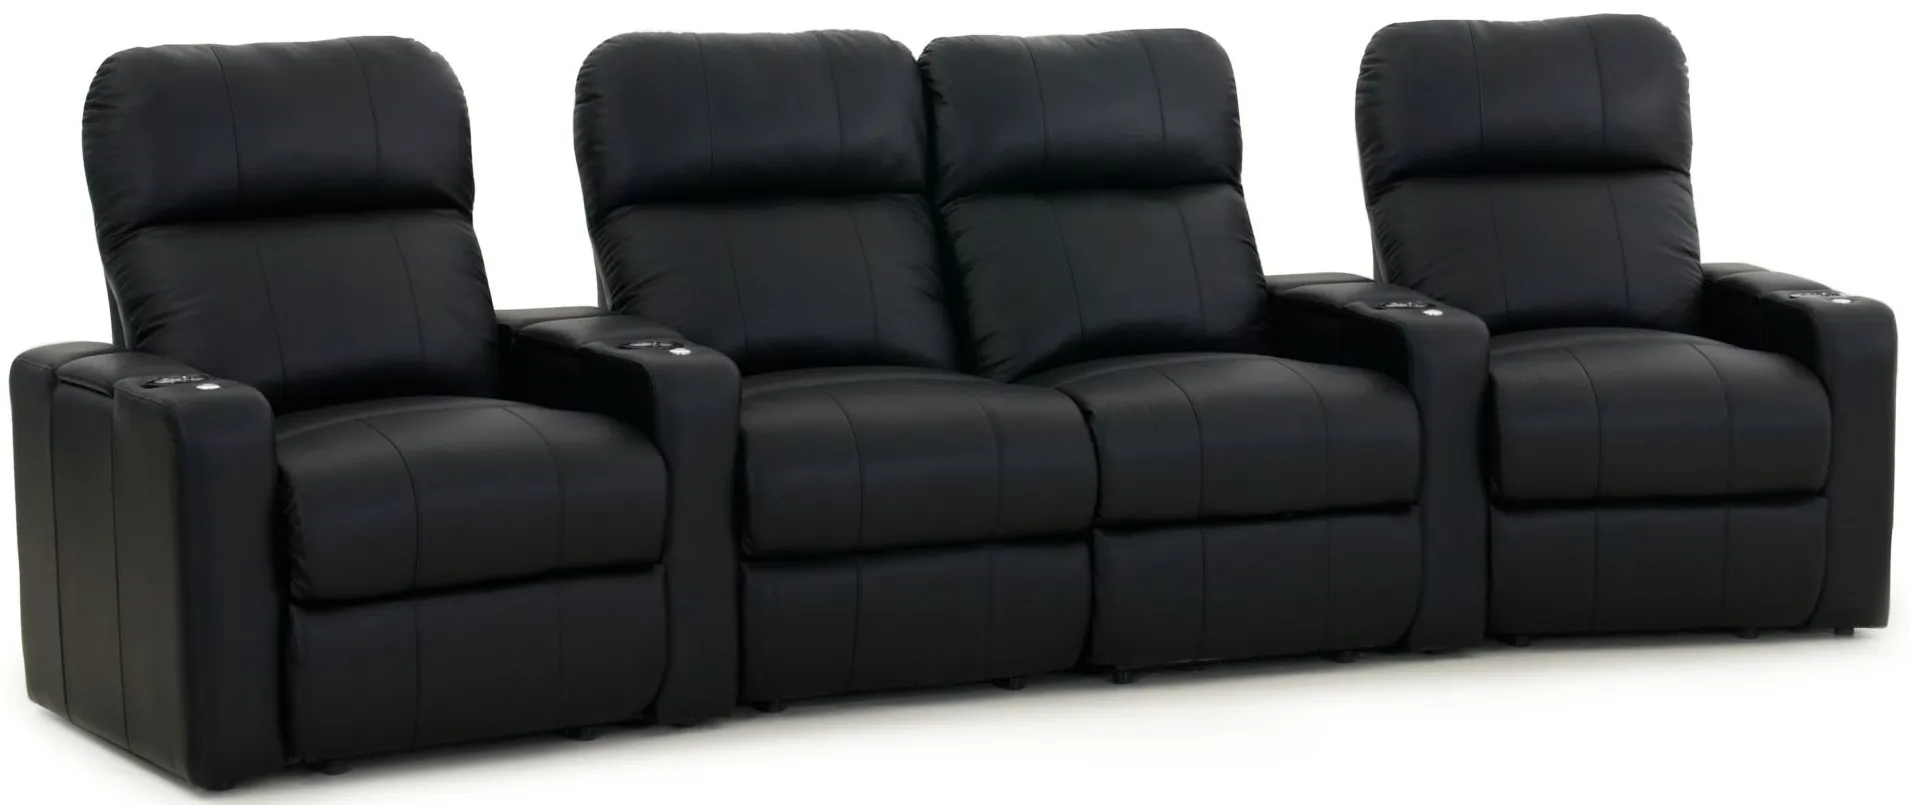 Marquee 4-pc Power Reclining Sectional in Black by Bellanest